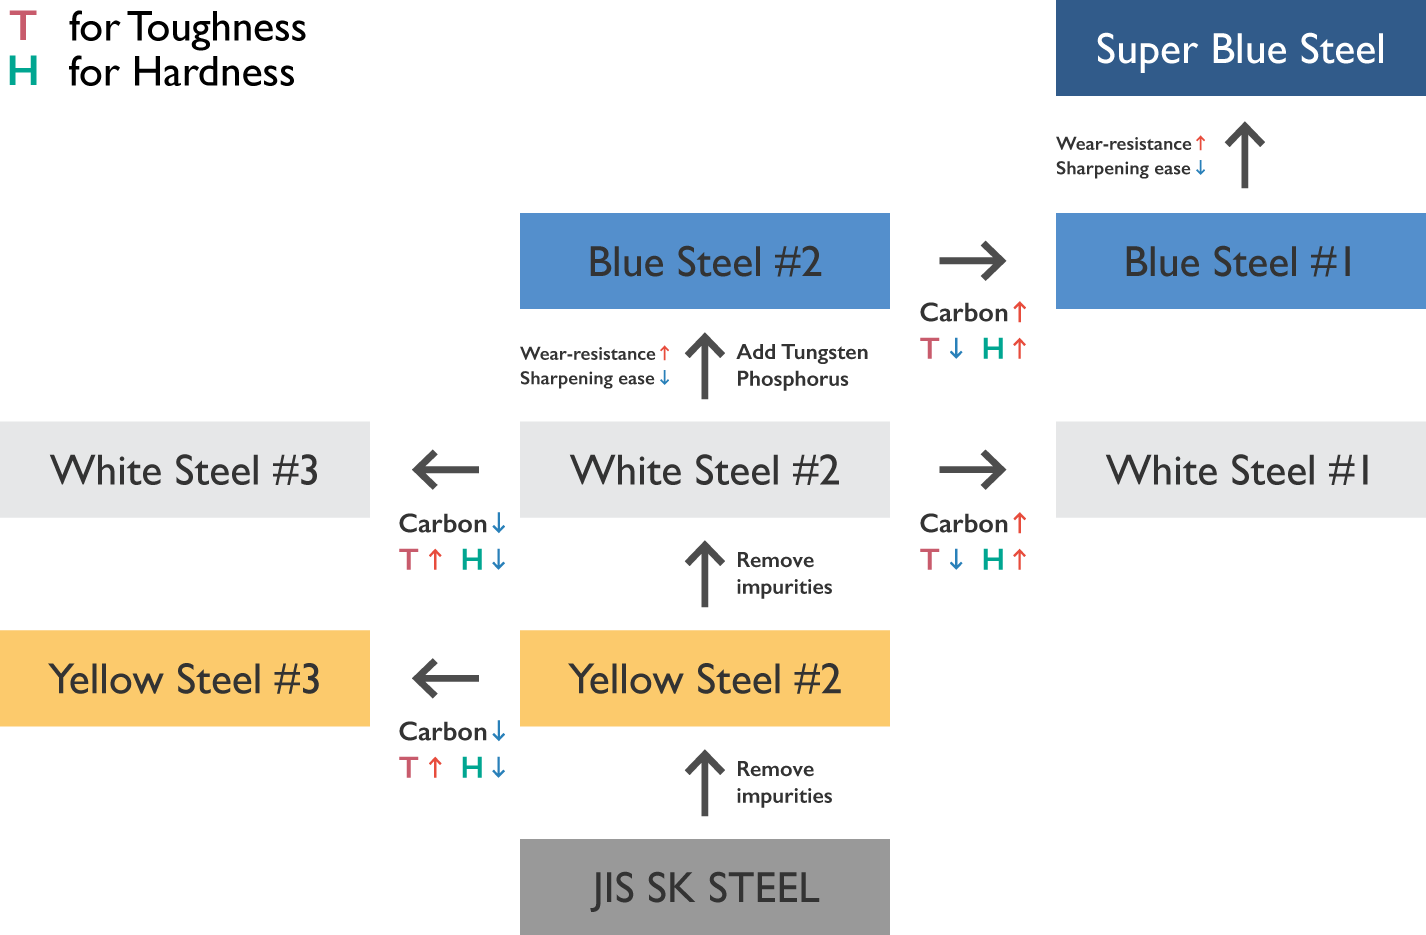 The figure showing the differece of white steel, yellow steel, blue steel, and super blue steel of Japanese knives